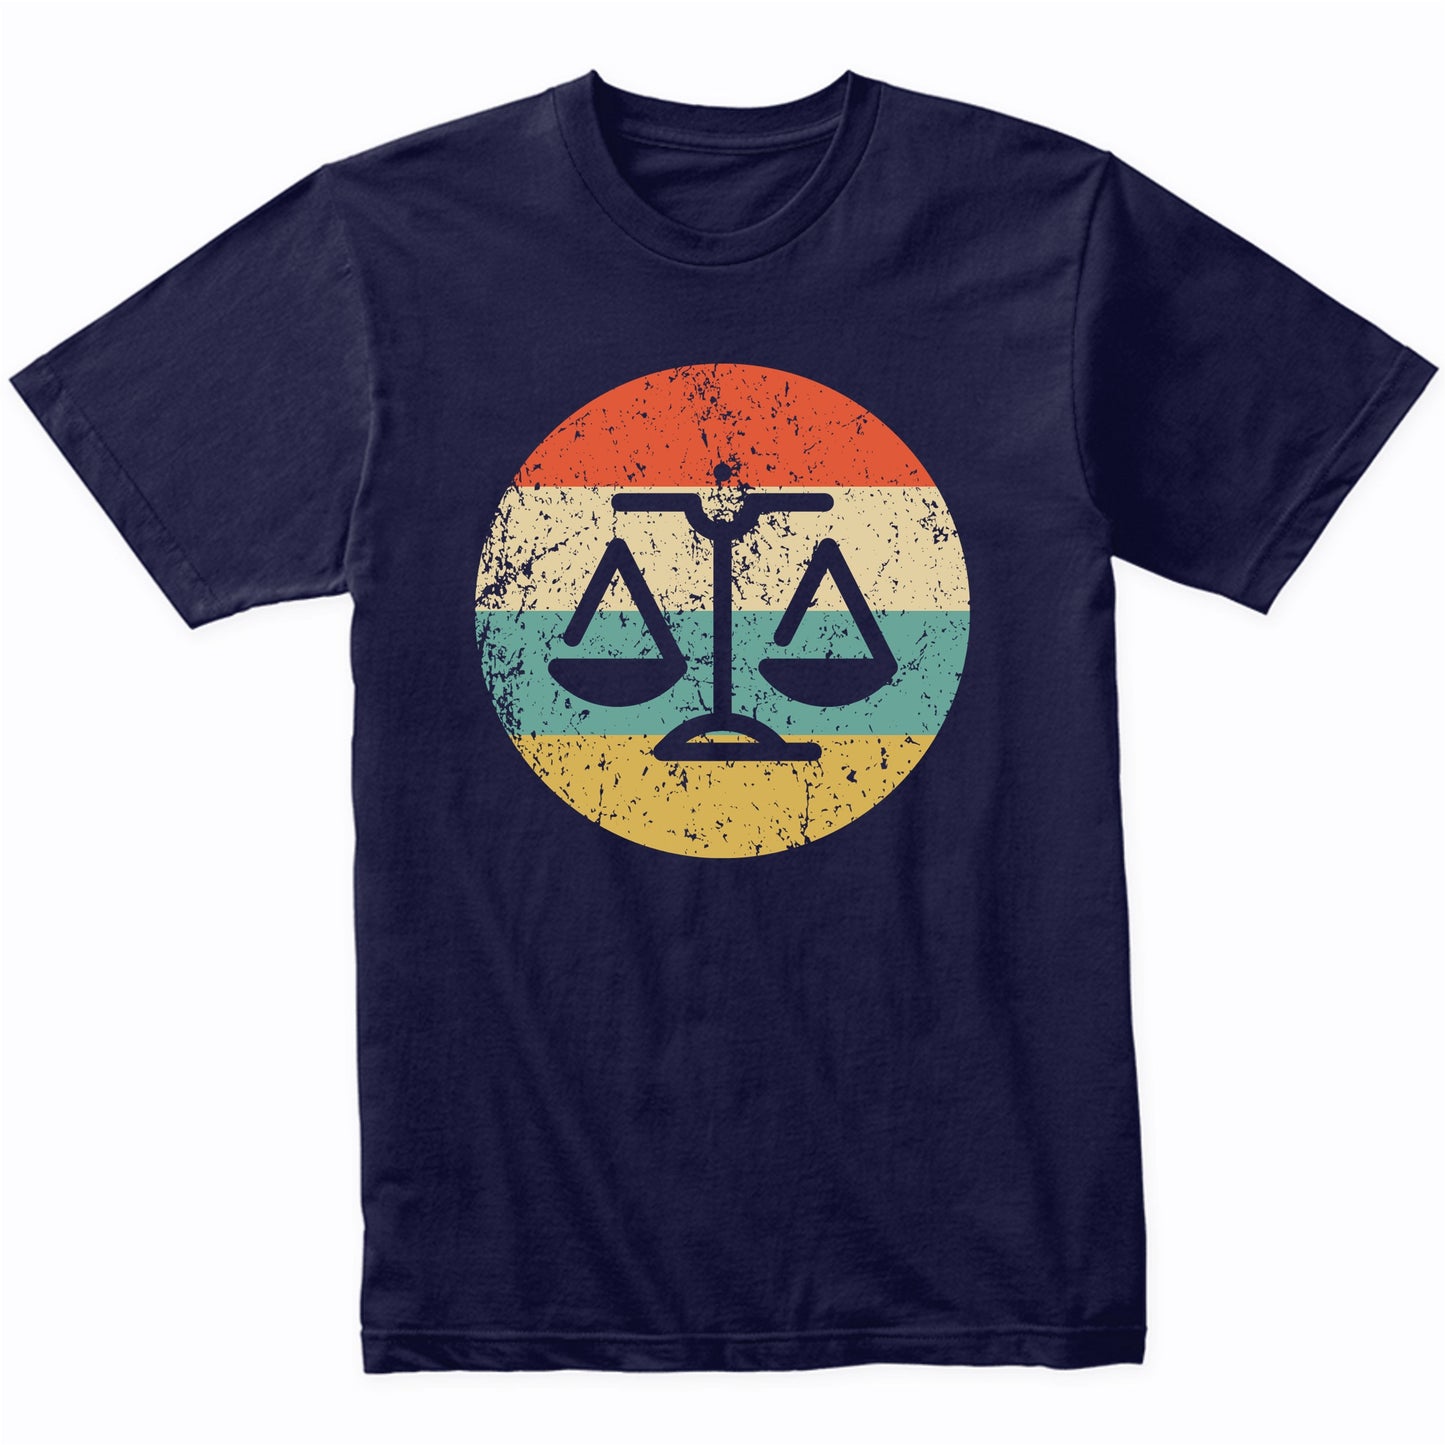 Lawyer Judge Shirt - Retro Scale of Justice T-Shirt